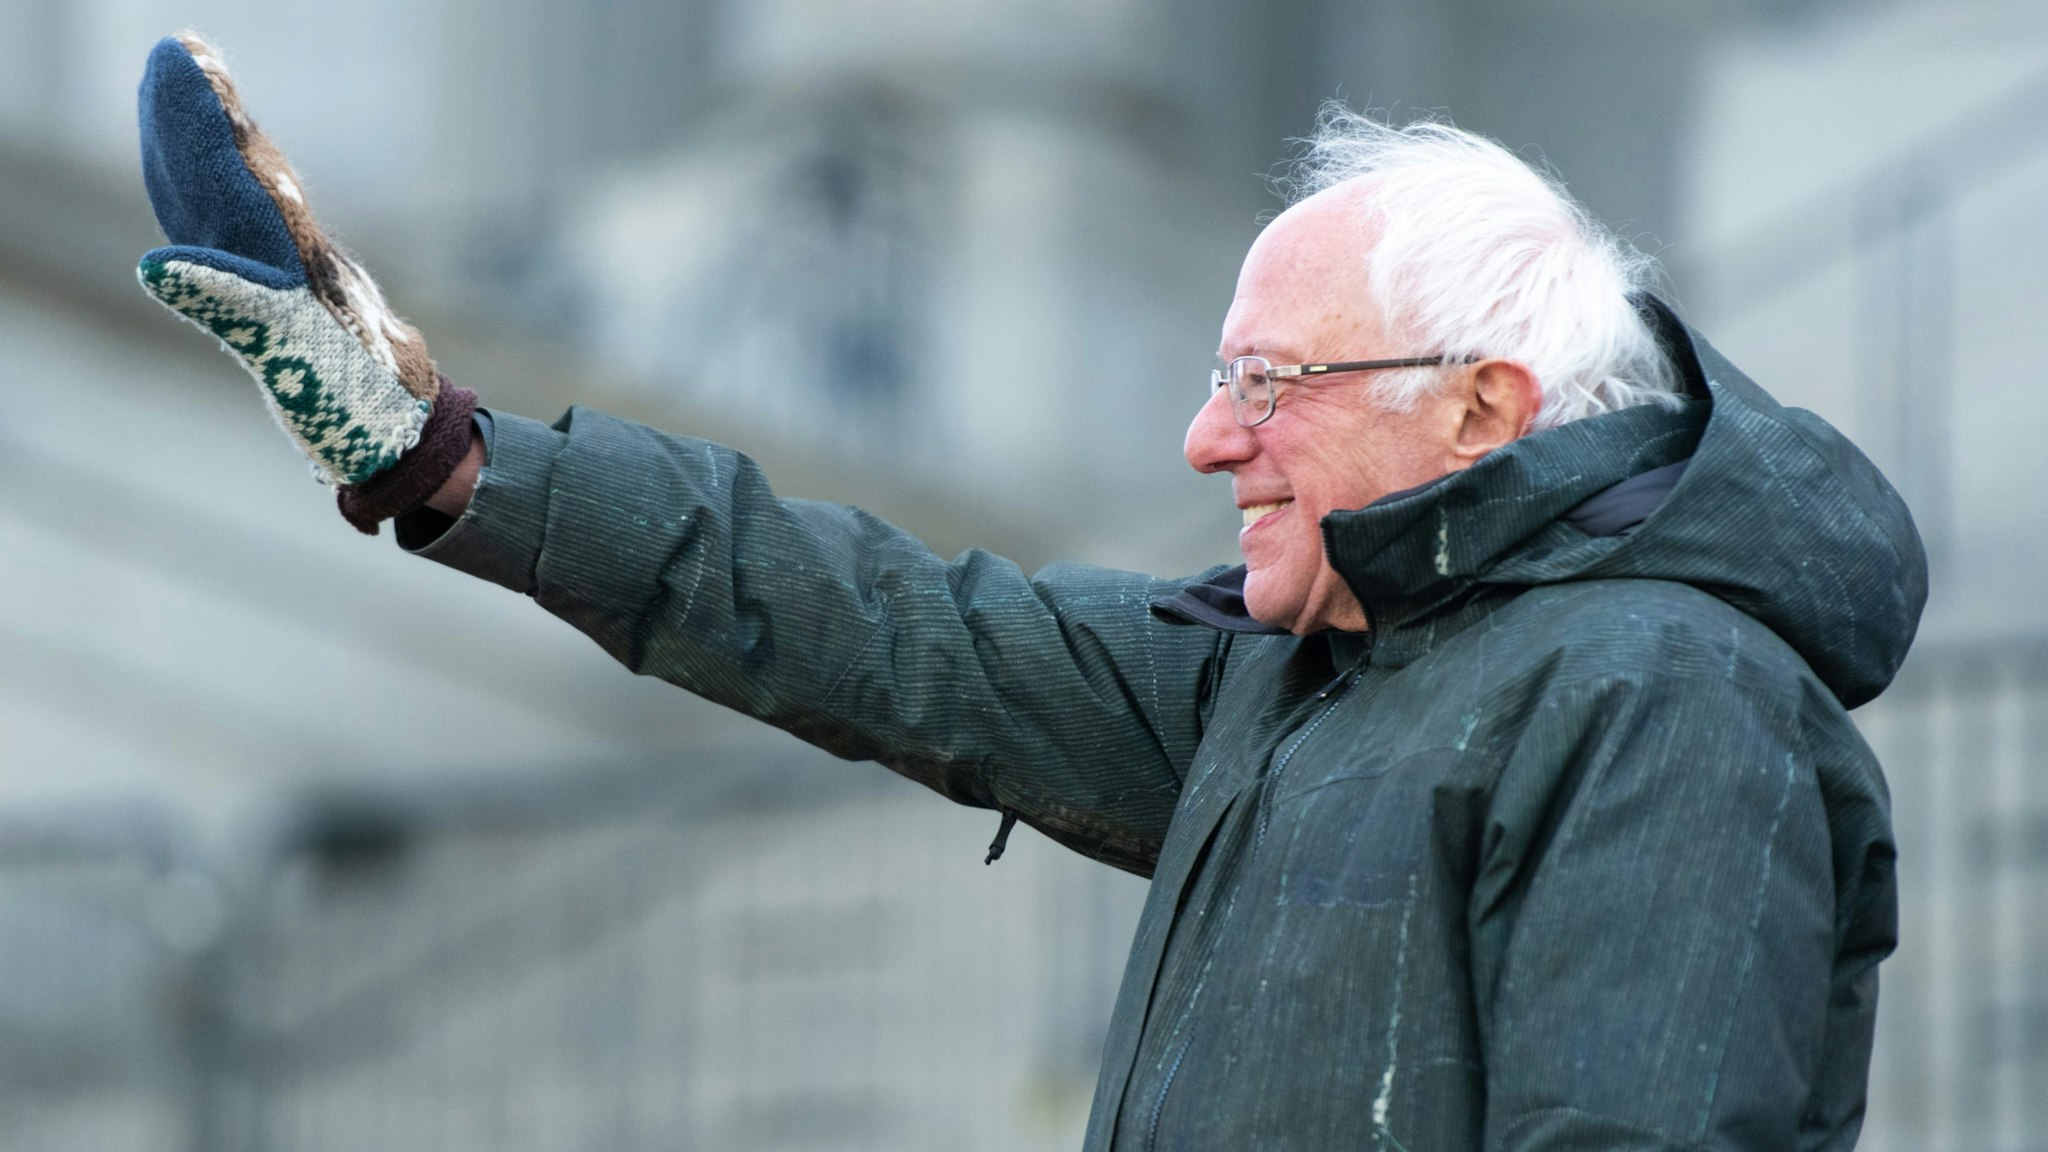 COLUMBIA, SC - JANUARY 20: Democratic presidential candidate, Sen. Bernie Sanders (I-VT) waves to the crowd during King Day at the Dome March and Rally on January 20, 2020 in Columbia, South Carolina. The event, first held in 2000 in opposition to the display of the Confederate battle flag at the statehouse, attracted more than a handful Democratic presidential candidates to the early primary state.